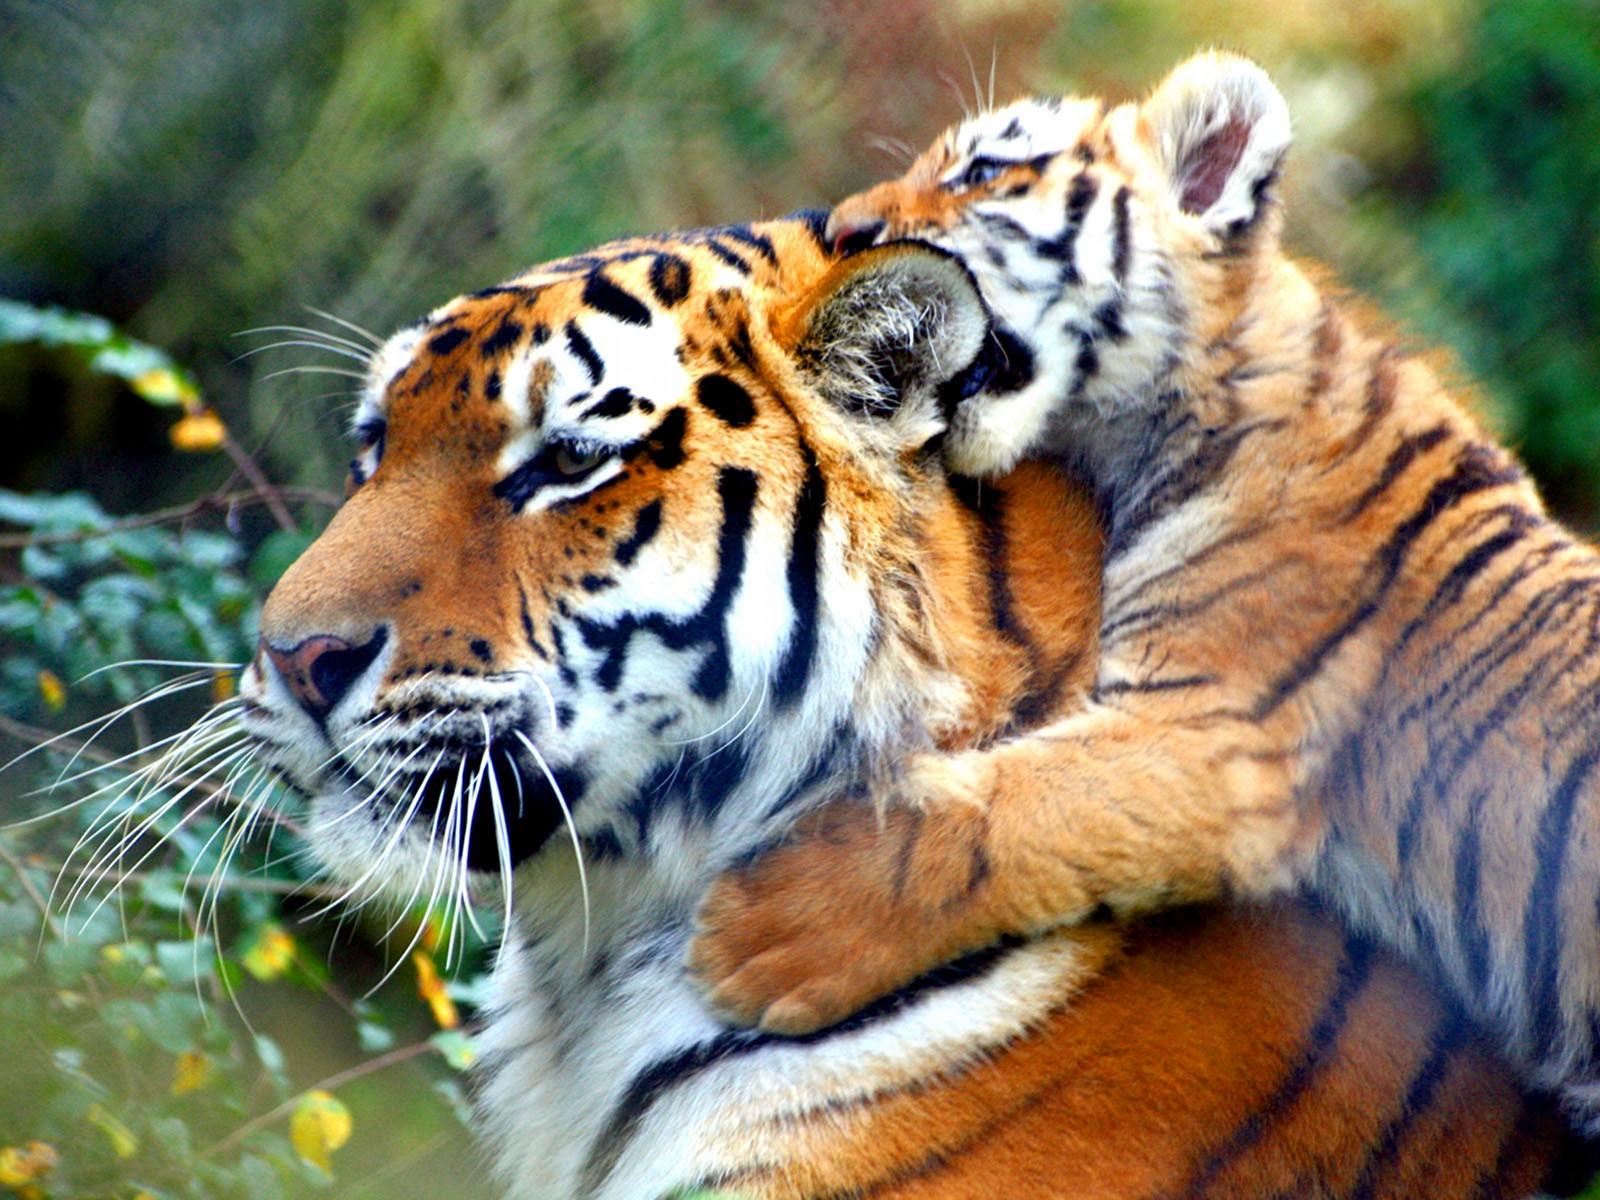 cute baby tigers picture. Image of Baby Tigers Cute Wallpaper